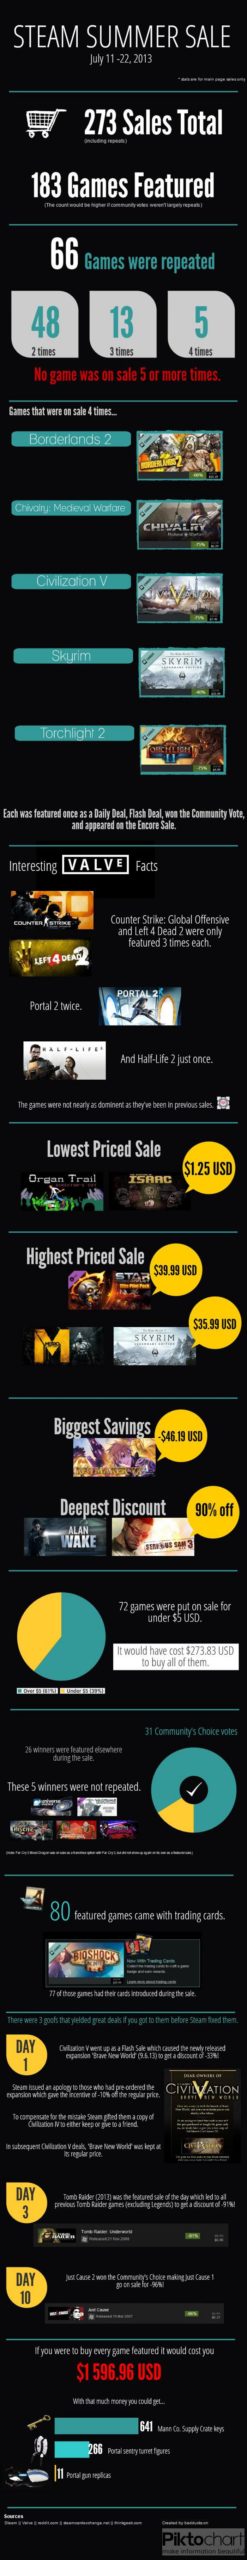 The Fascinating Numbers Behind This Year’s Steam Summer Sale